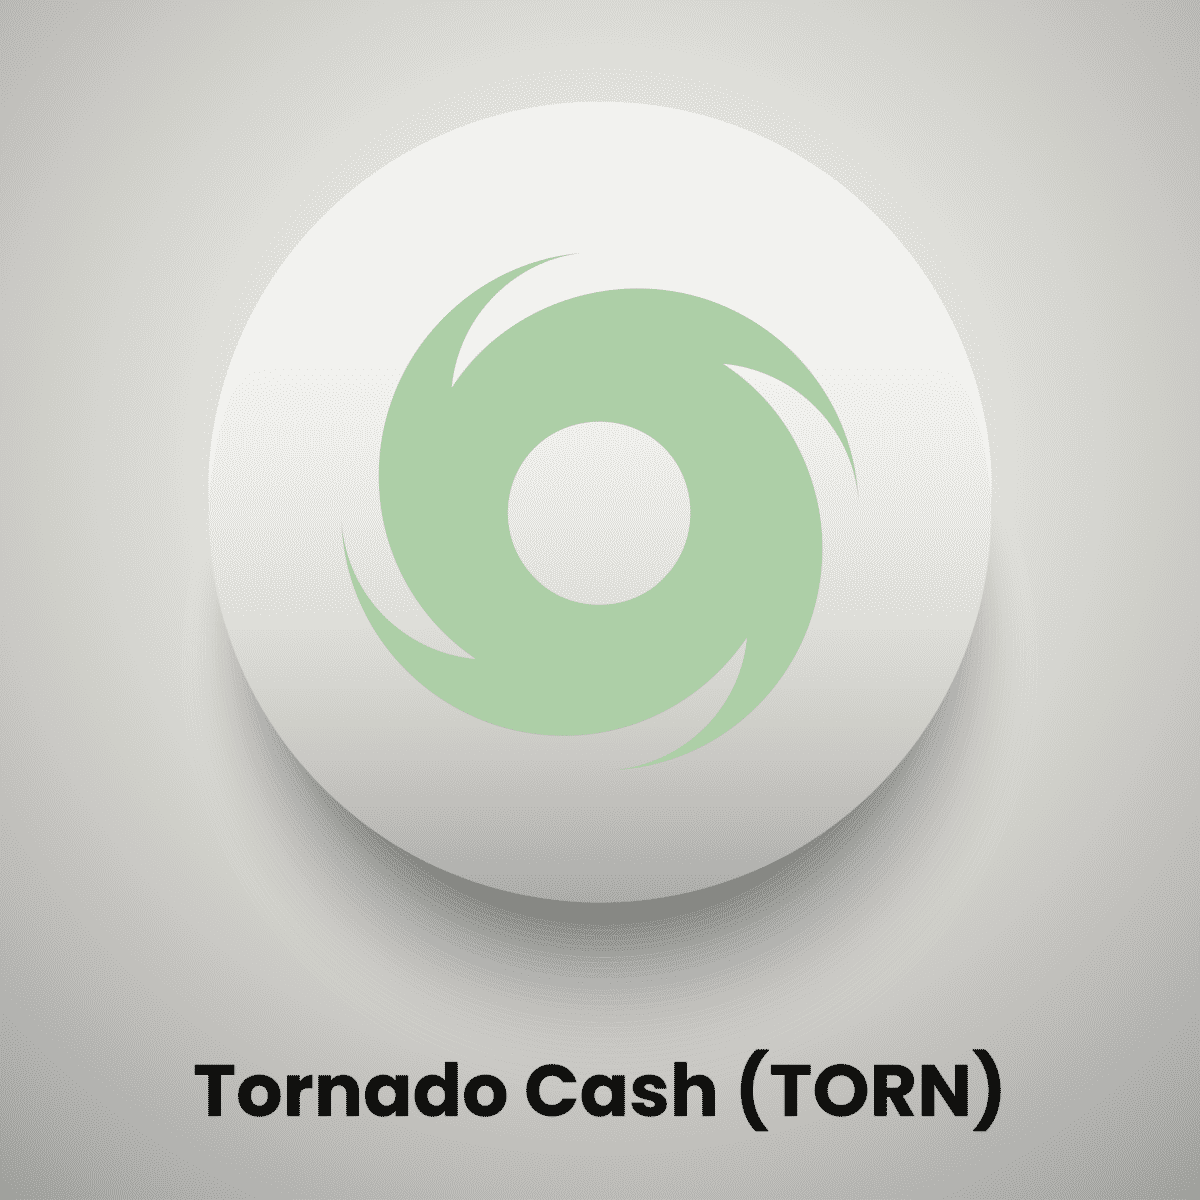 Crypto Mixer Tornado Cash Won't Comply With Sanctions